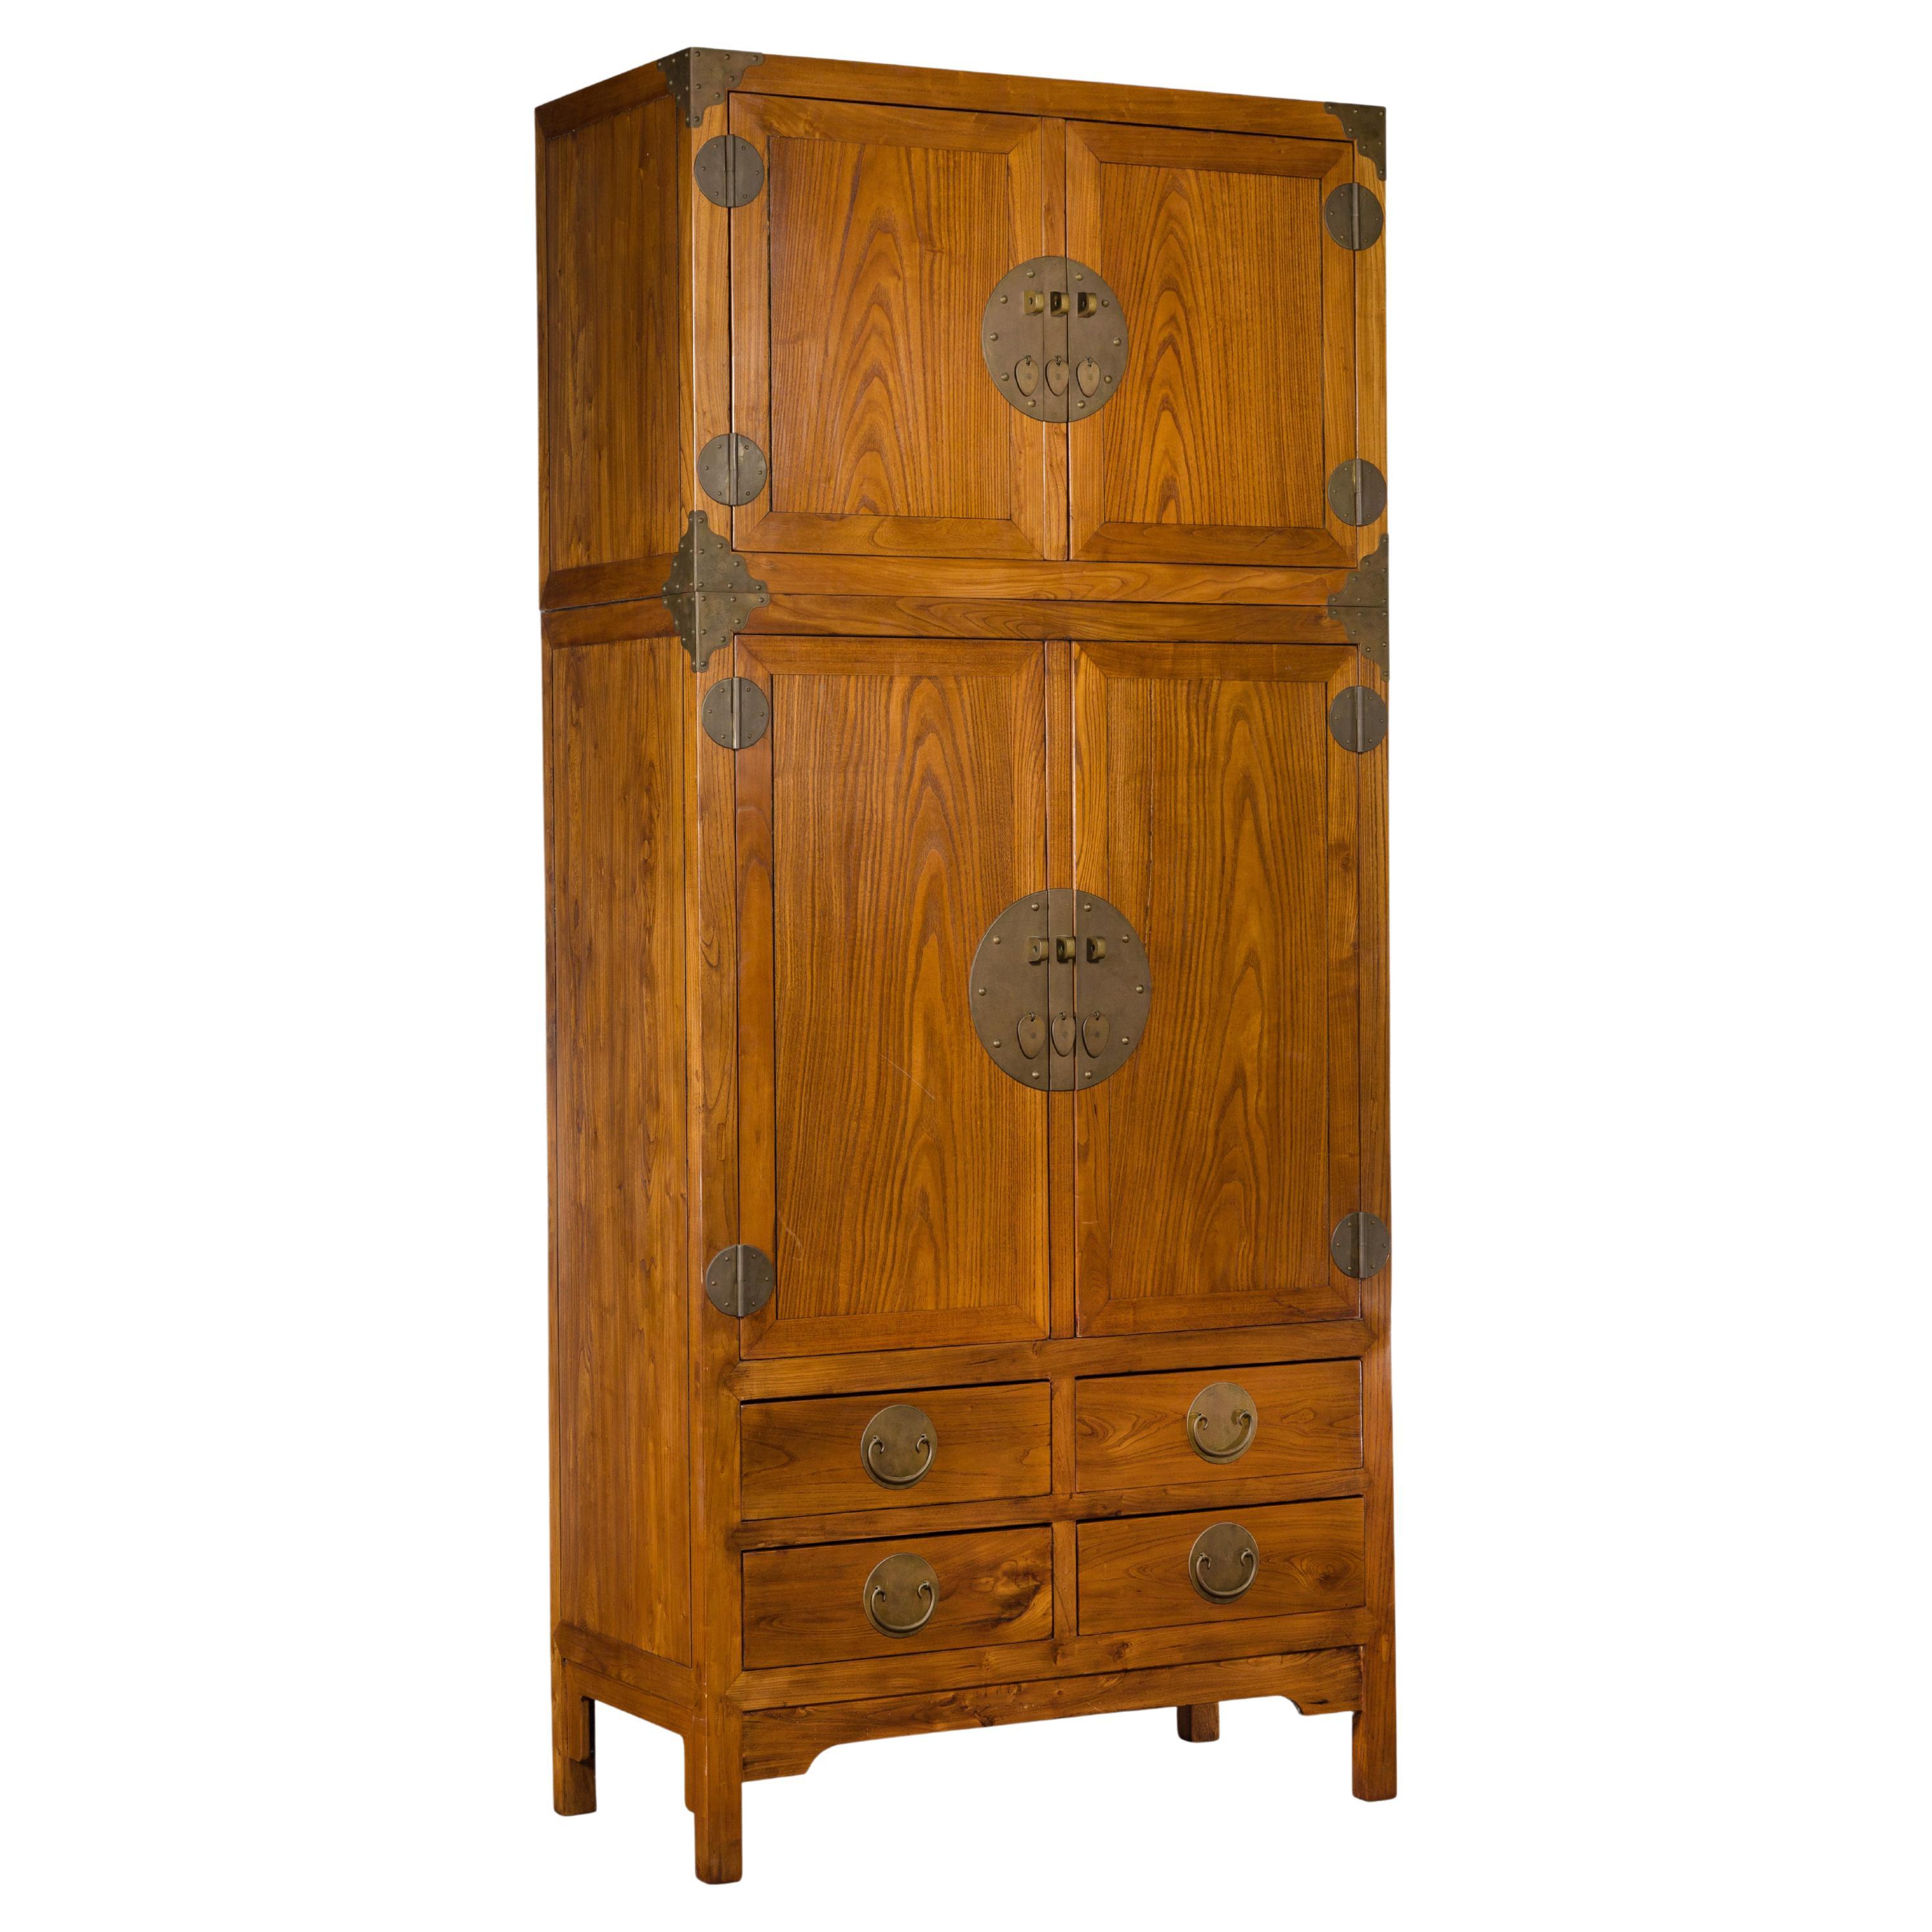 What is the purpose of a china cabinet?